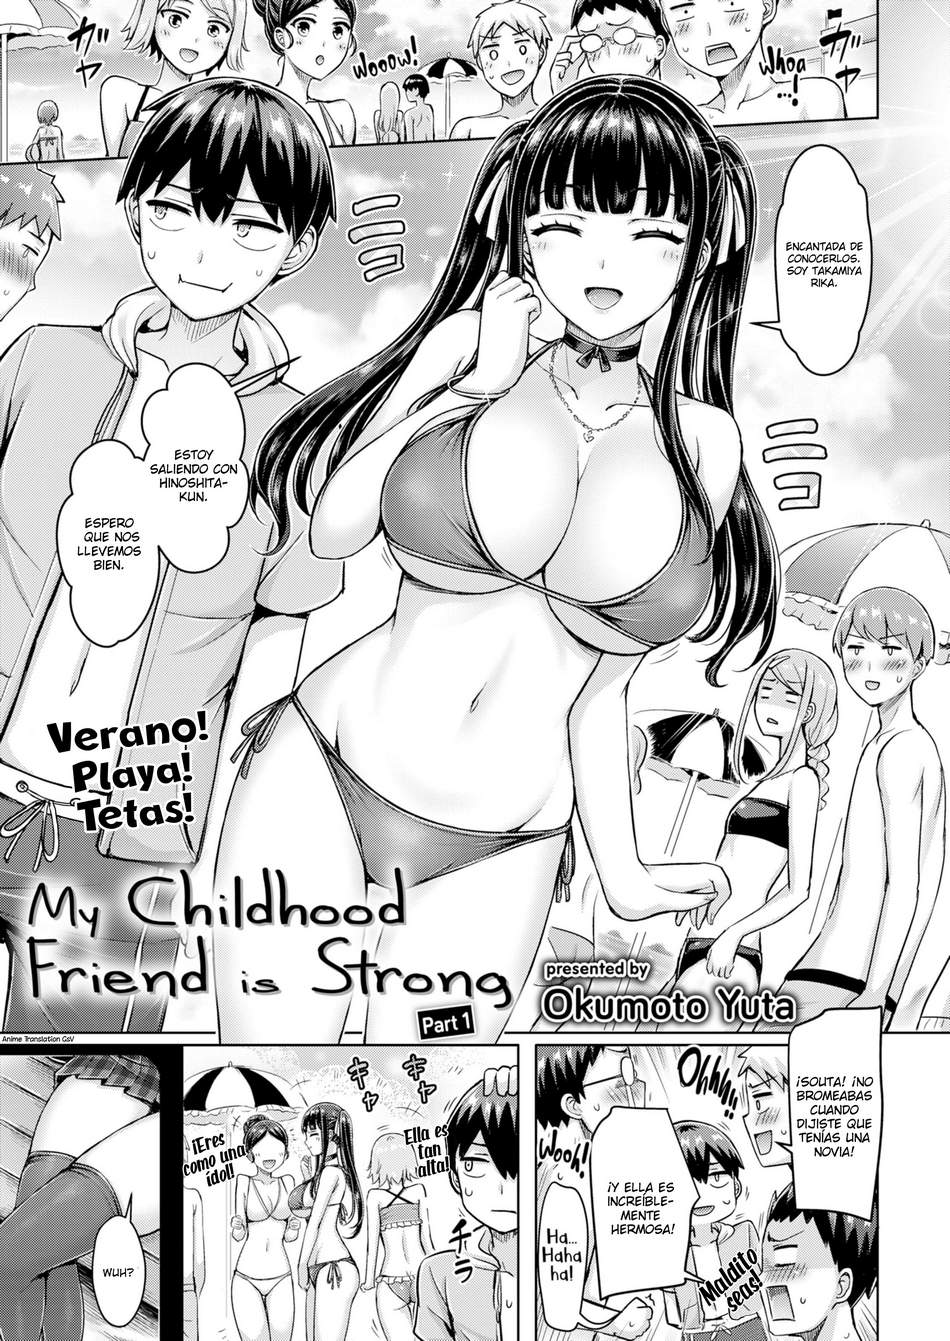 My Childhood Friend is Strong #1 - Page #1